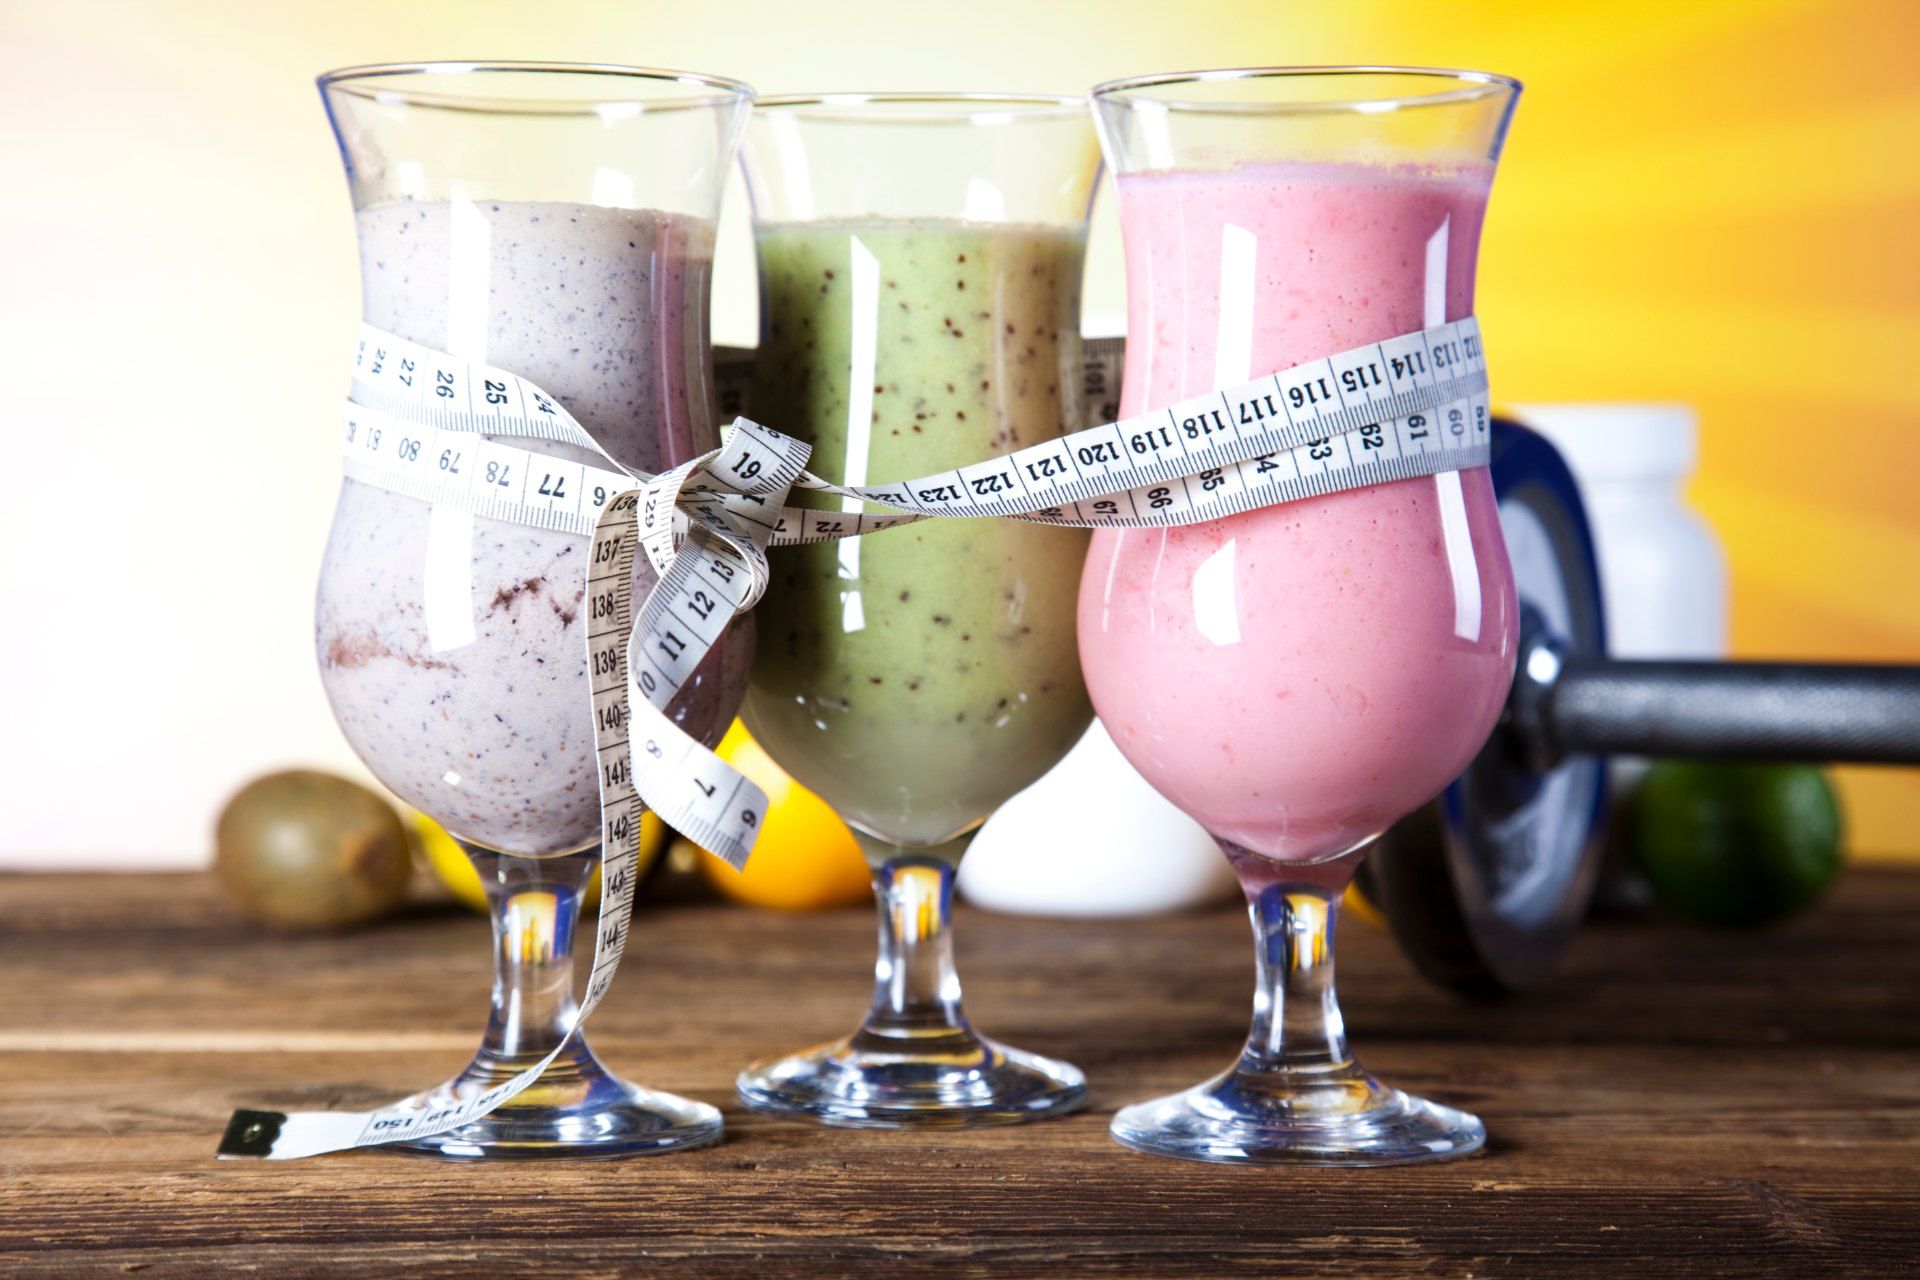 Three varieties of smoothies in glasses, tied together with a measuring tape